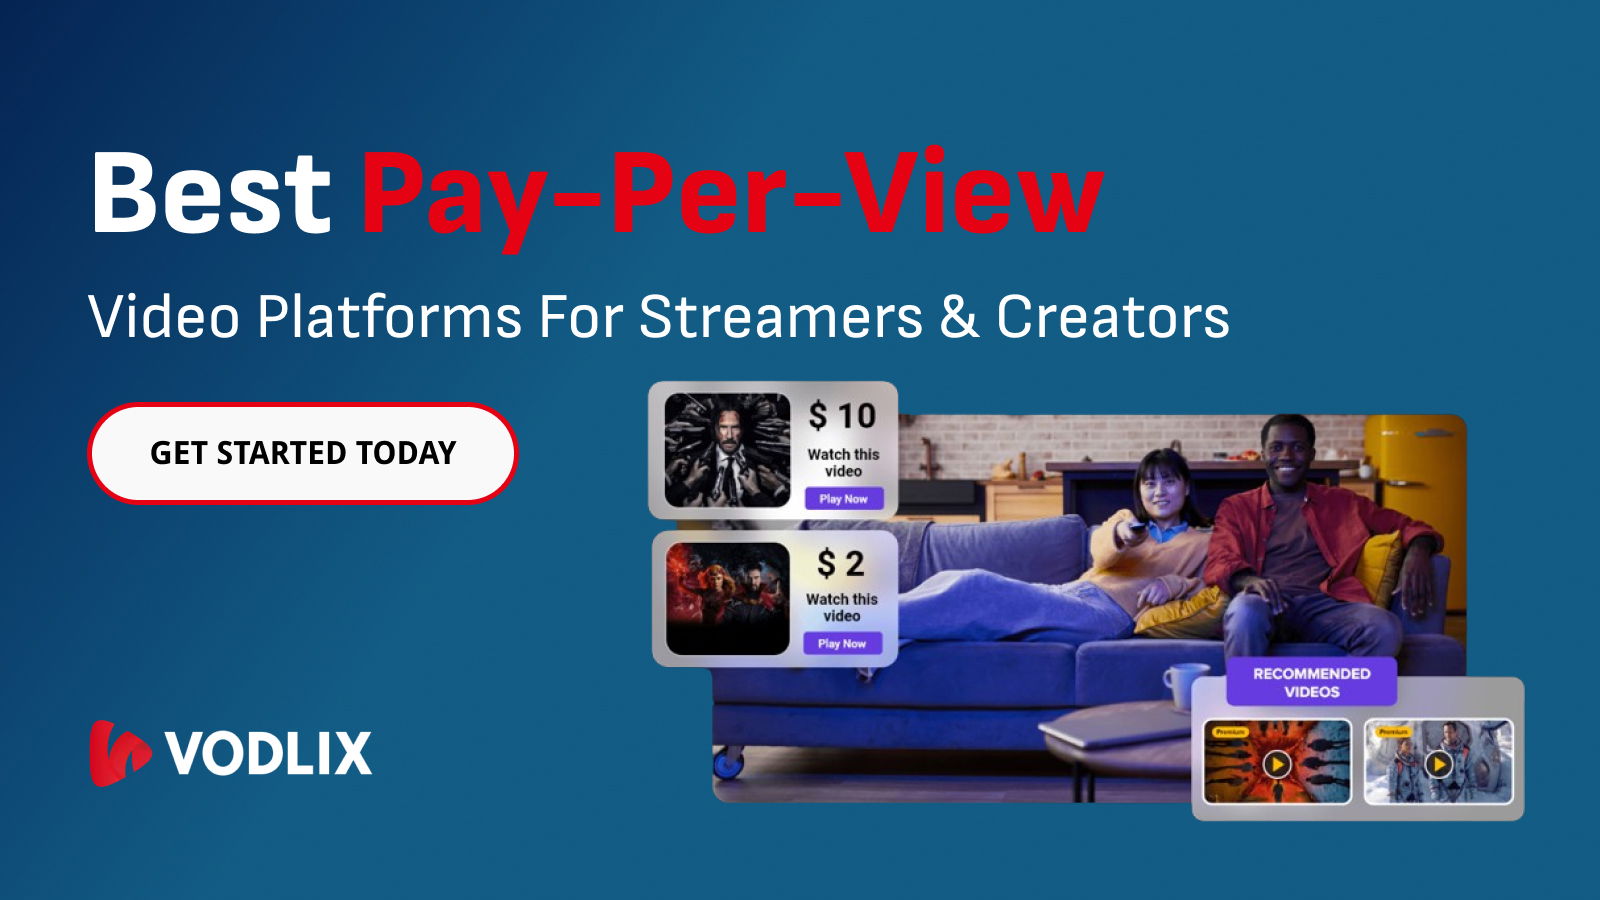 Best Pay-Per-View Video Platforms for Streamers & Creators